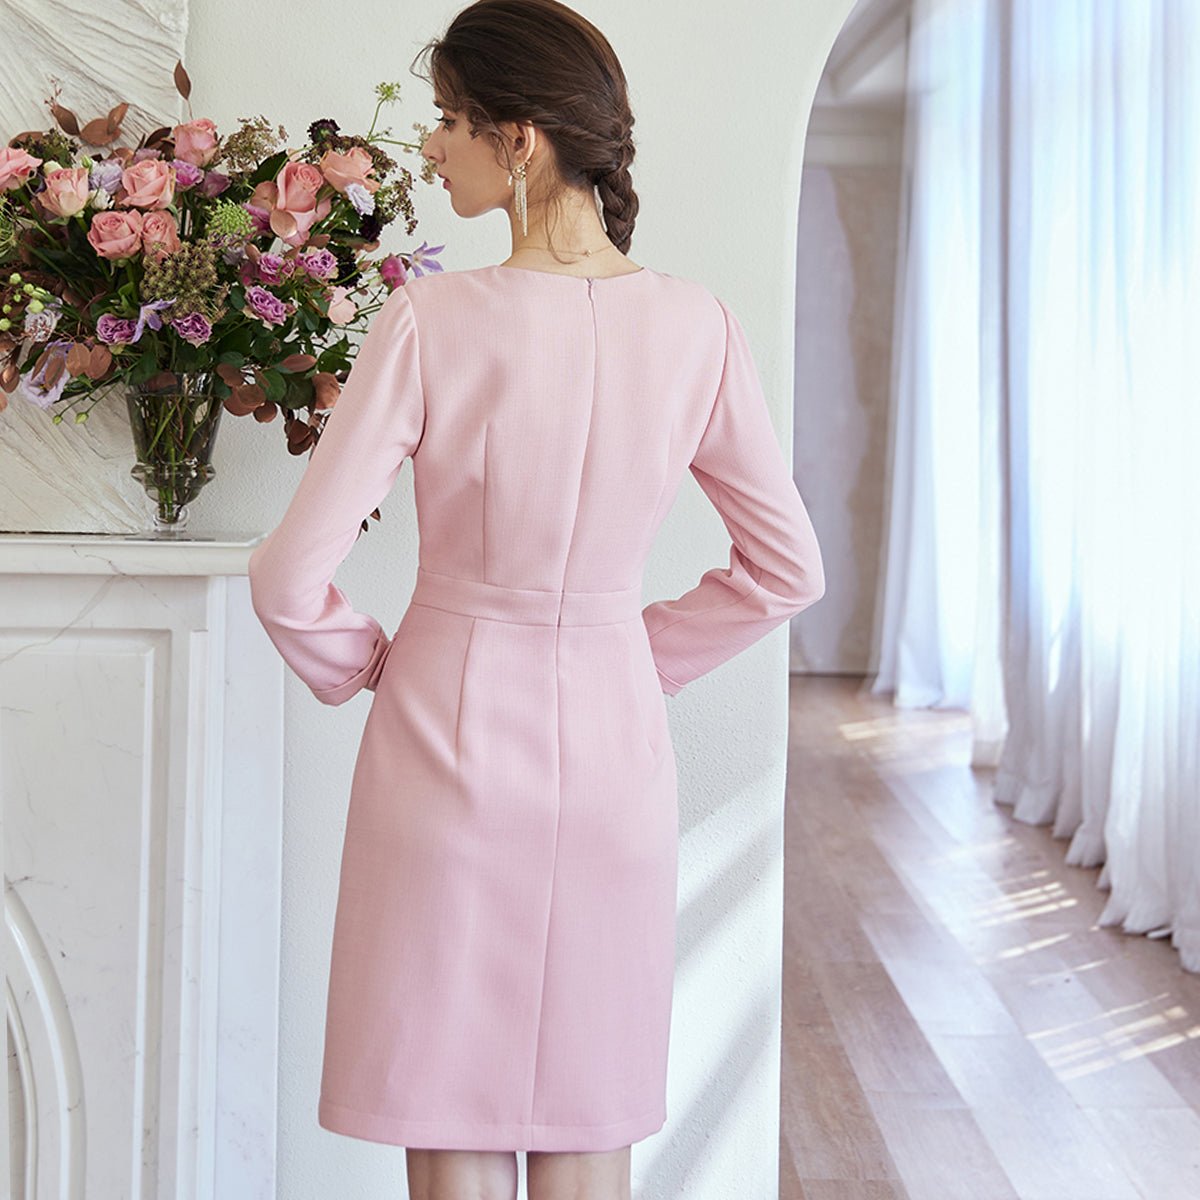 Chic Buttoned Pink Dress - 0cm